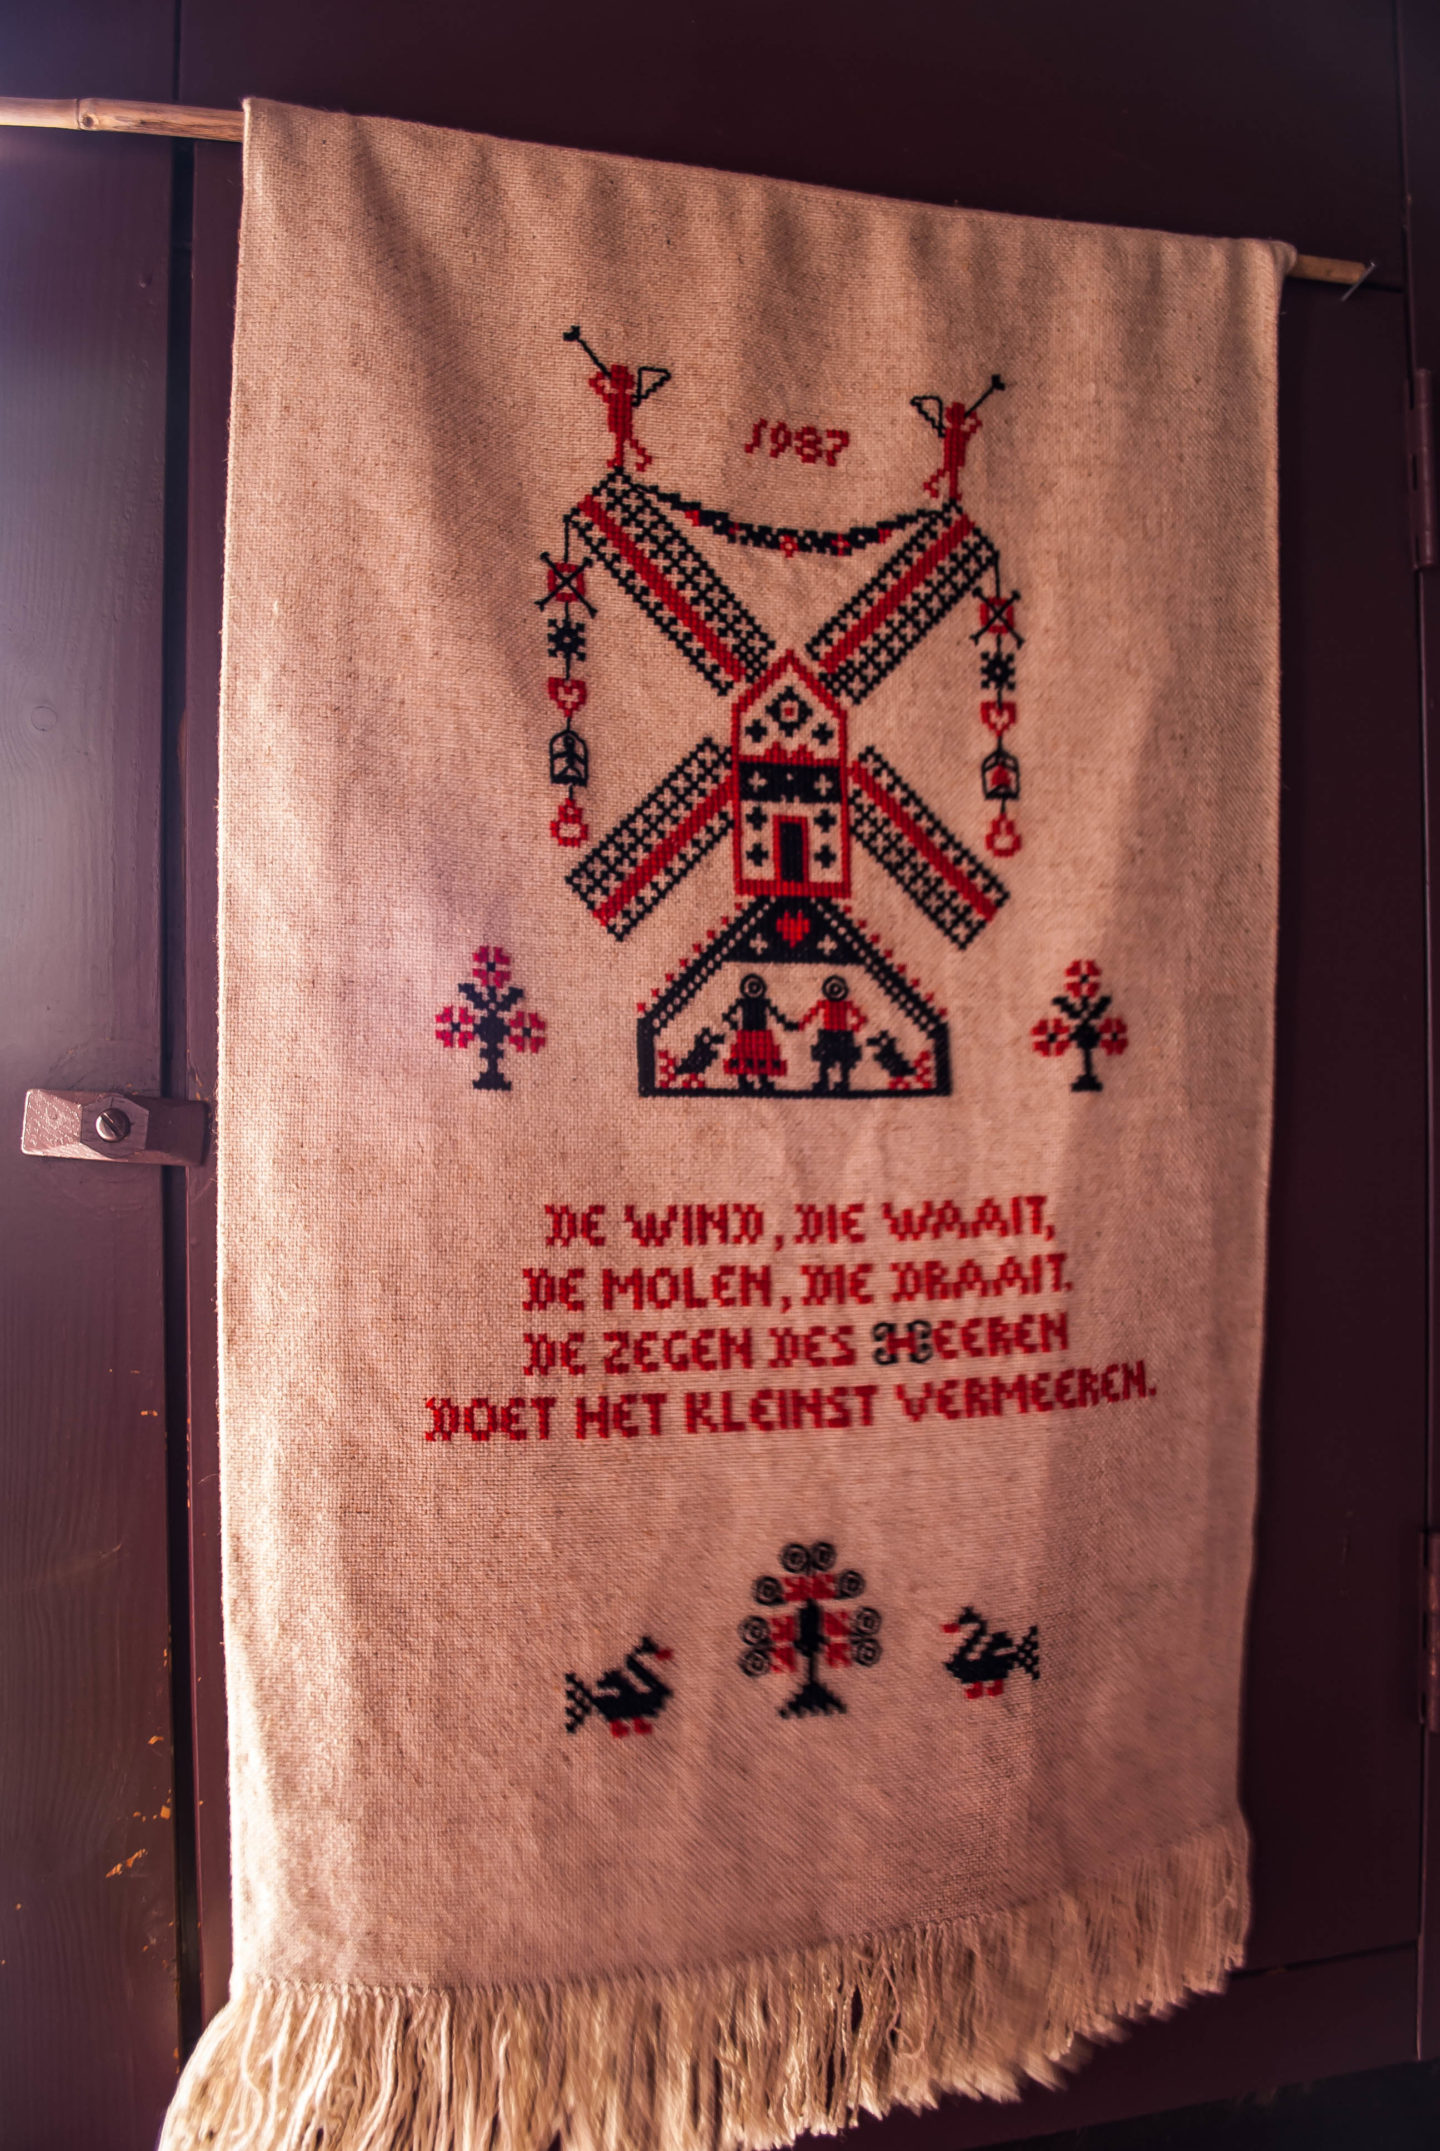 Embroidery hanging in one of the windmills. Rough translation: 'The wind that blows, the mill that turns, the blessing of the Lord that makes the small increase.'